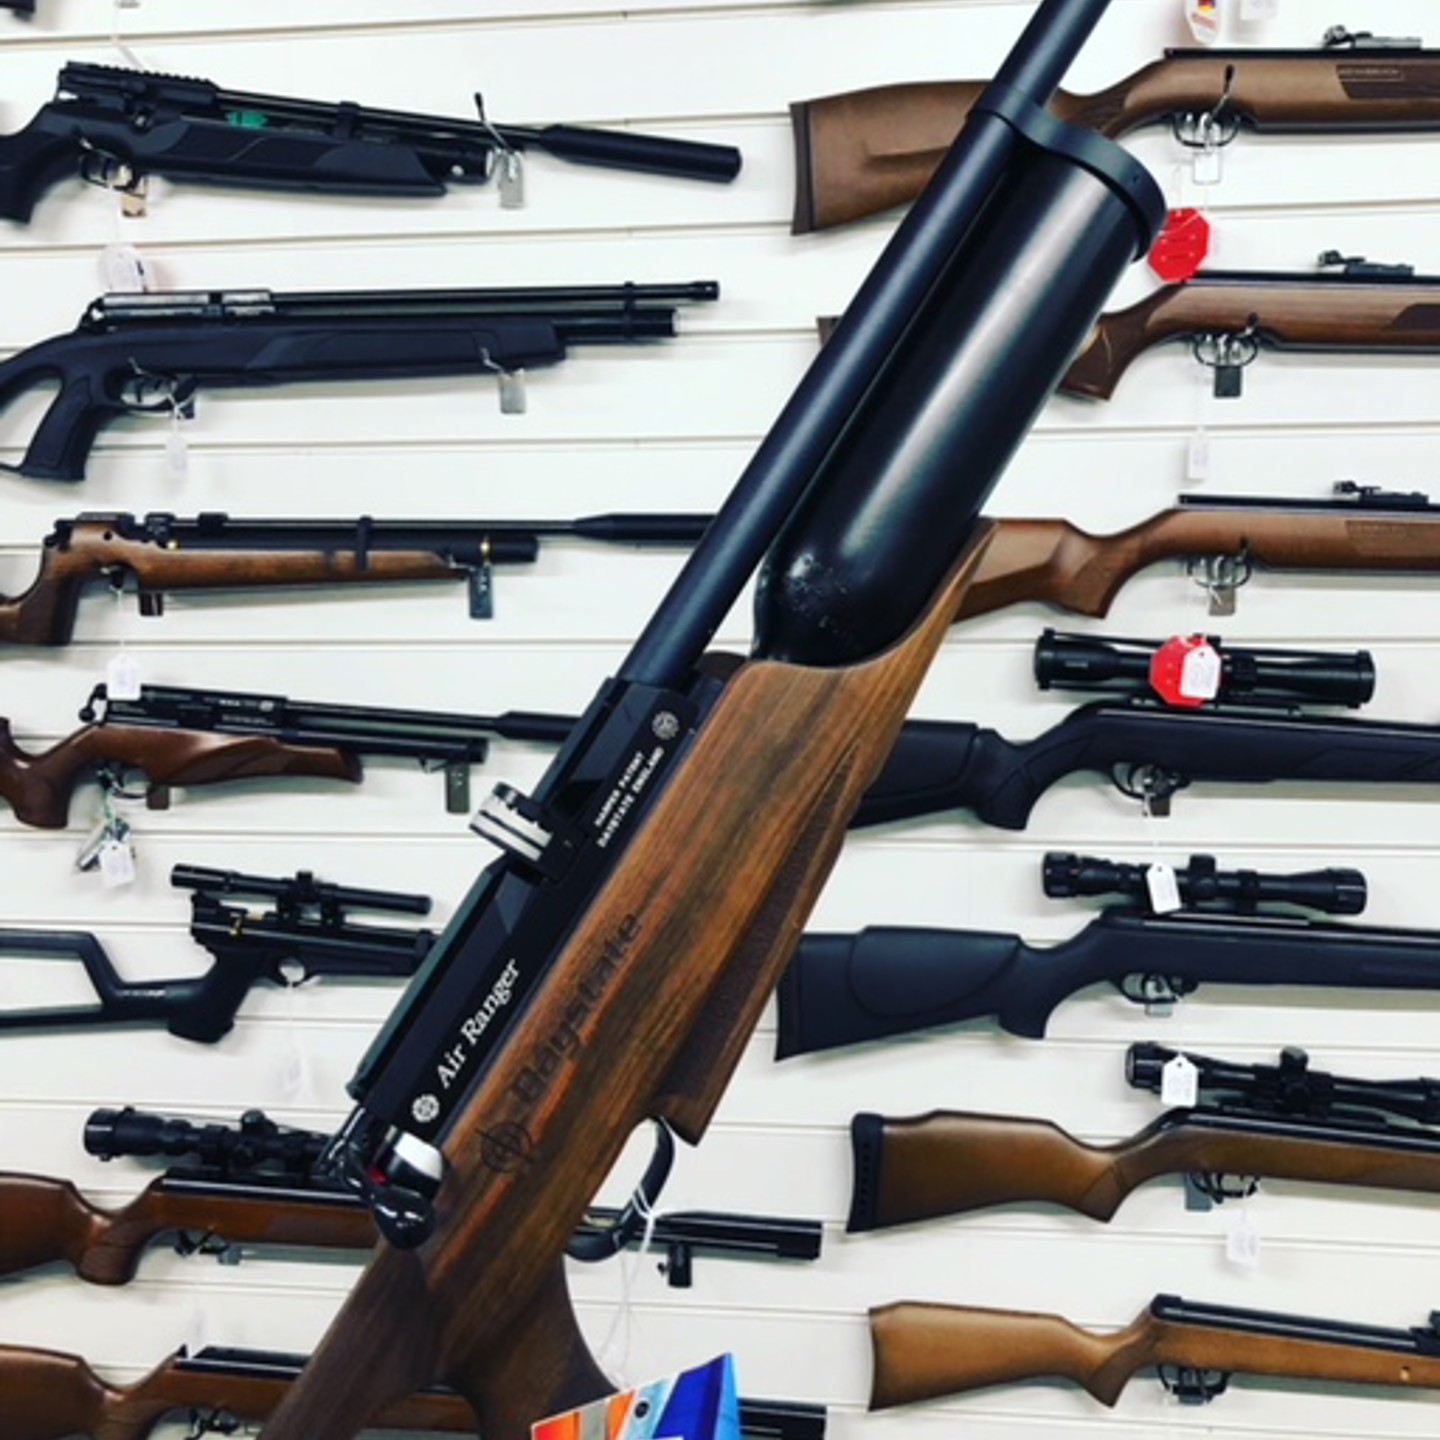 Affordable Guns Gloucester Clearance Of Shop Contents Sold Ś70,000